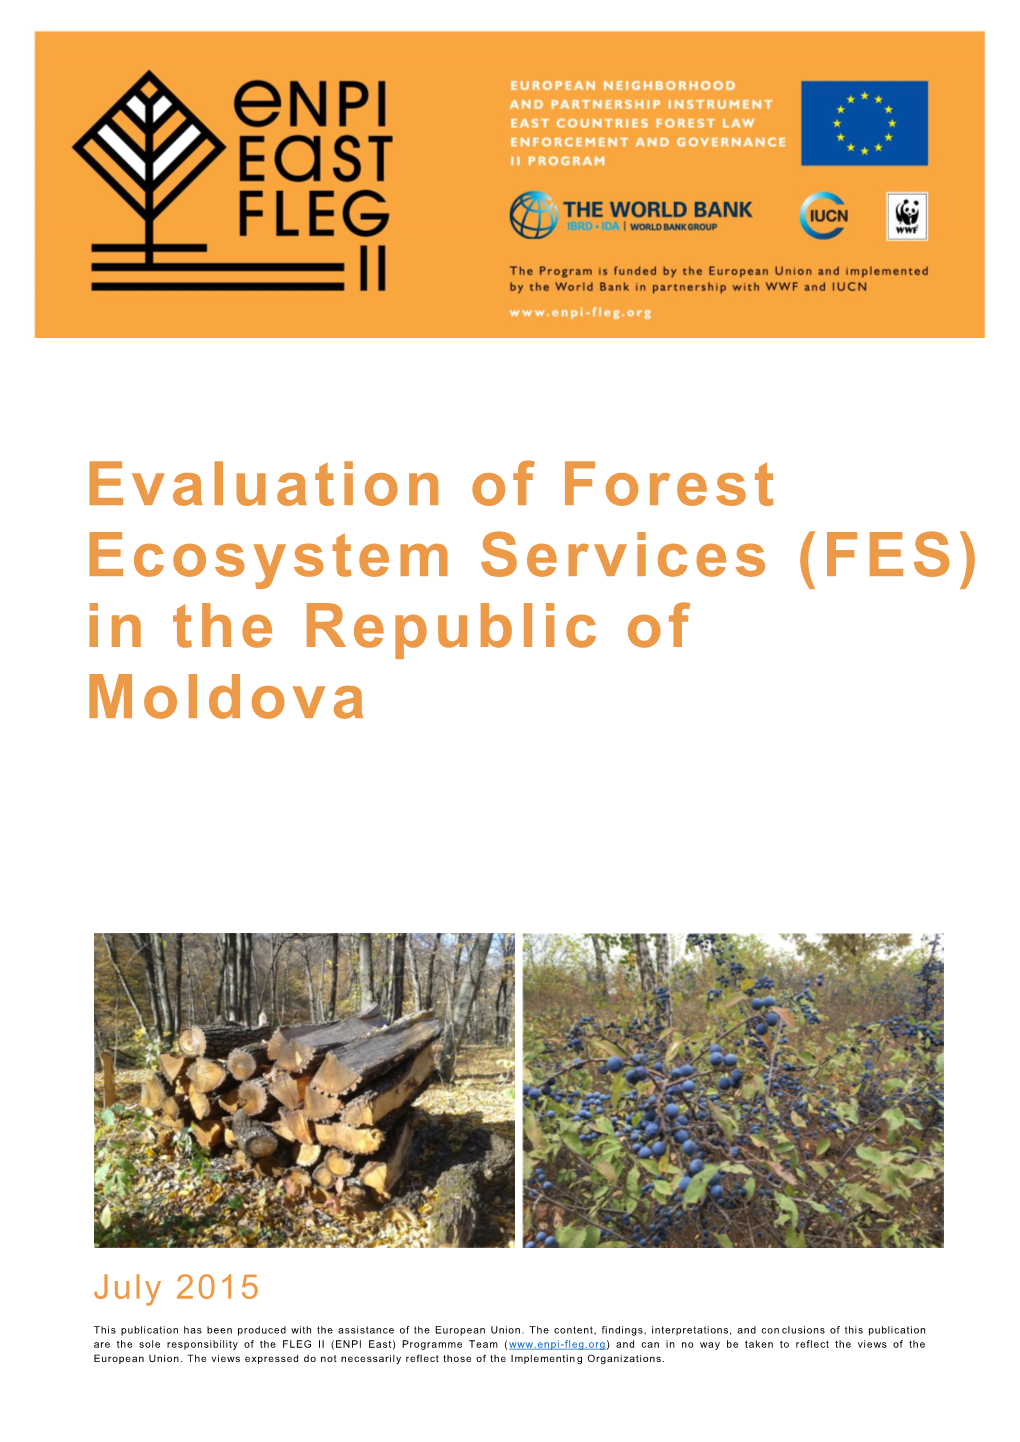 Evaluation of Forest Ecosystem Services (FES) in the Republic of Moldova